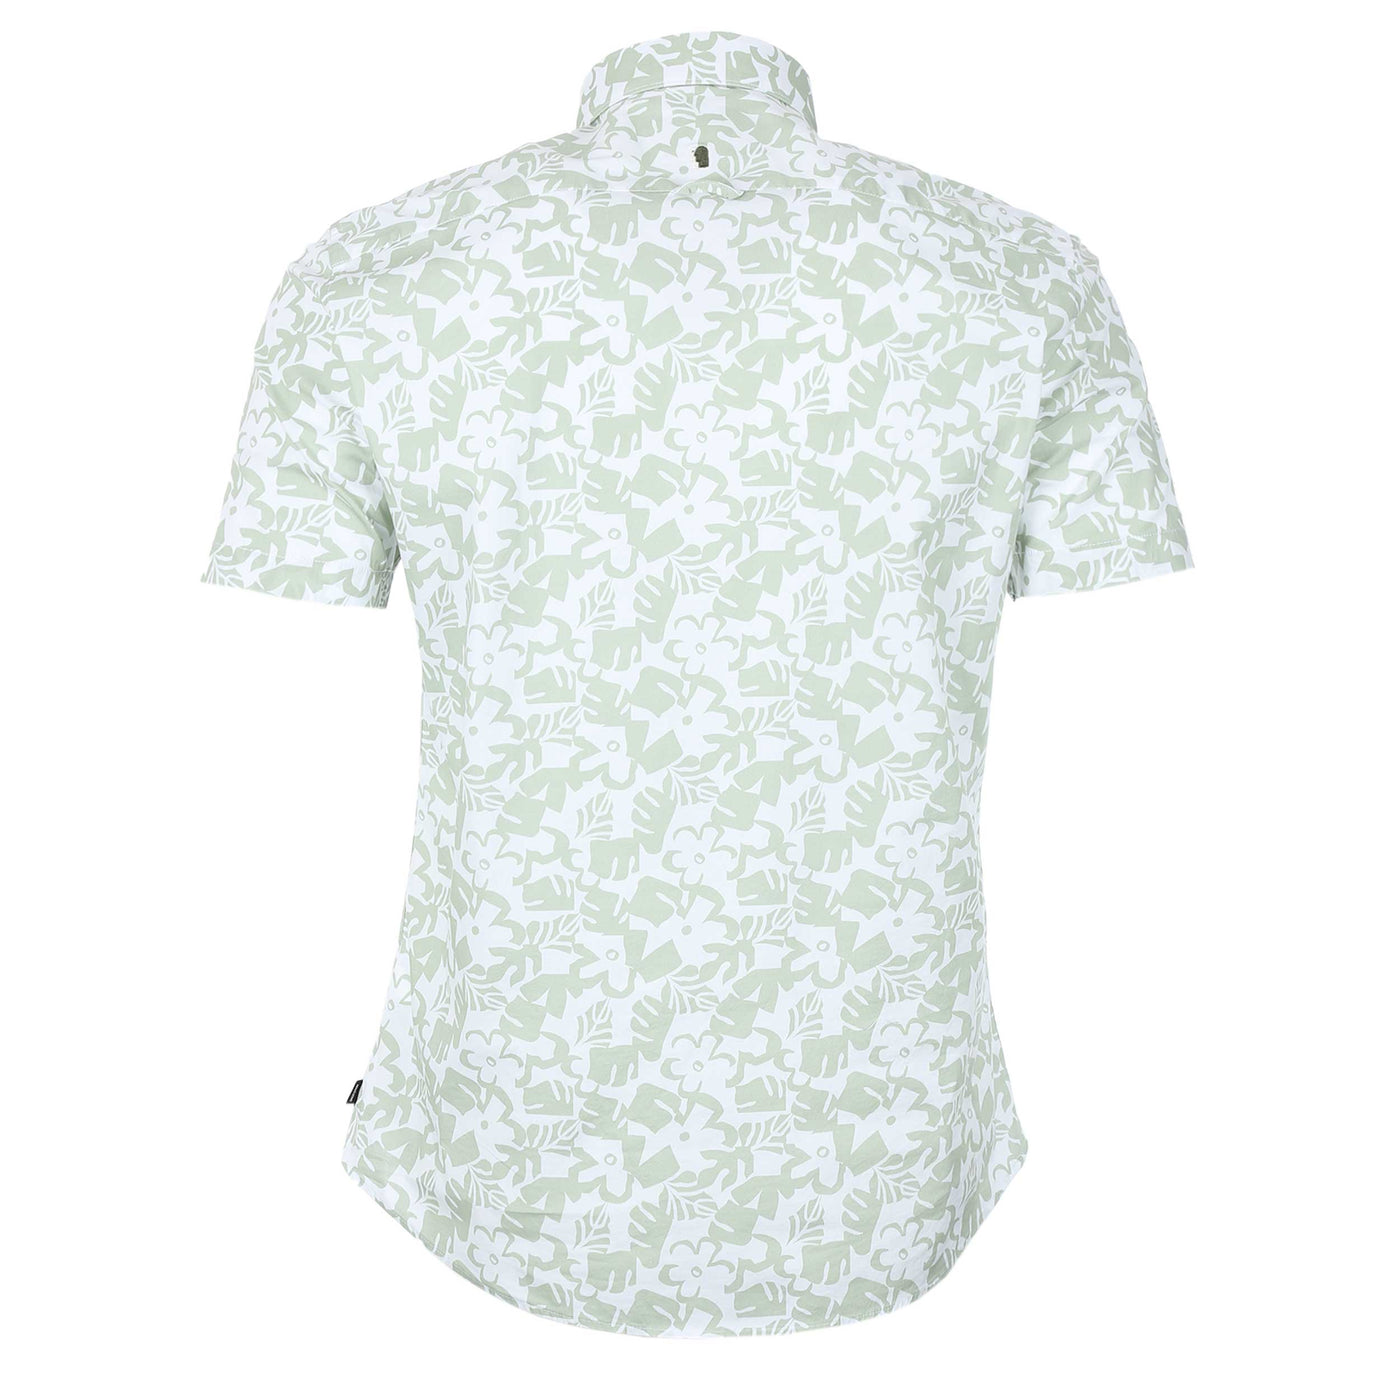 Remus Uomo Leaf Floral Print Short Sleeve Shirt in Mint White Back